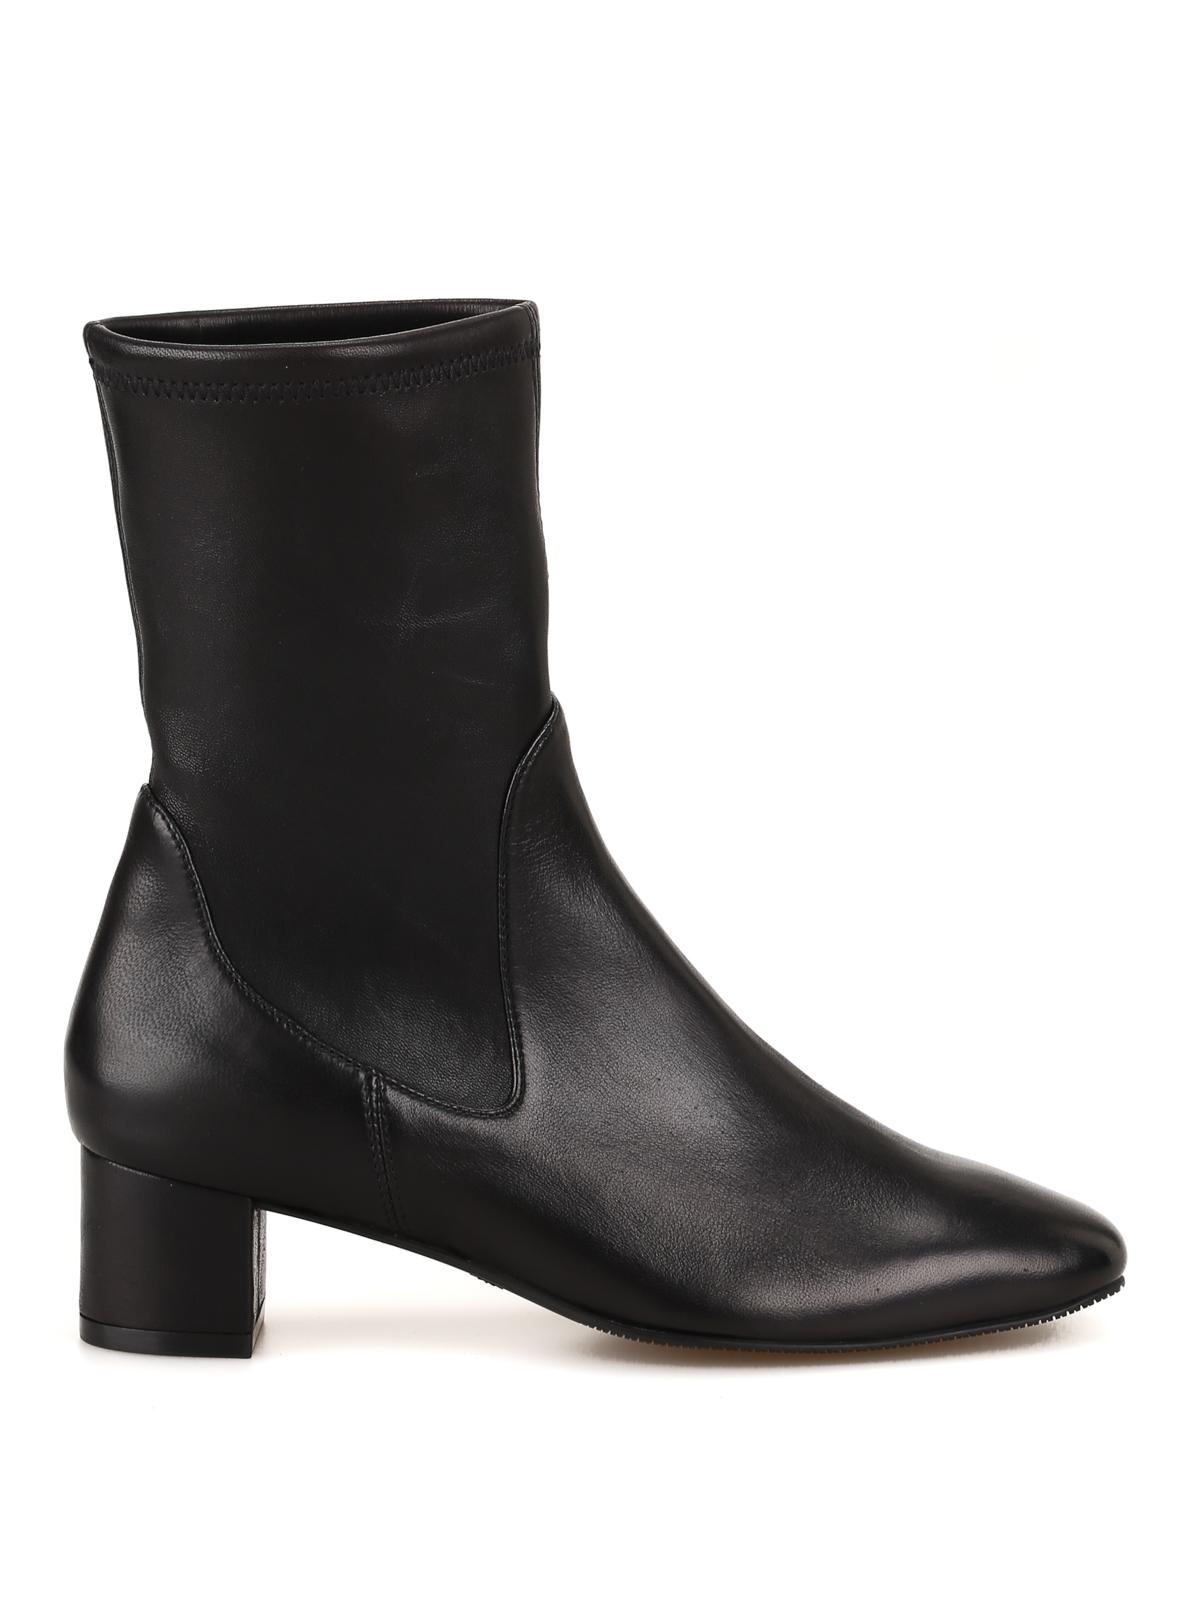 Stuart Weitzman Leather Ernestine Stretch Ankle Boots in Black - Lyst